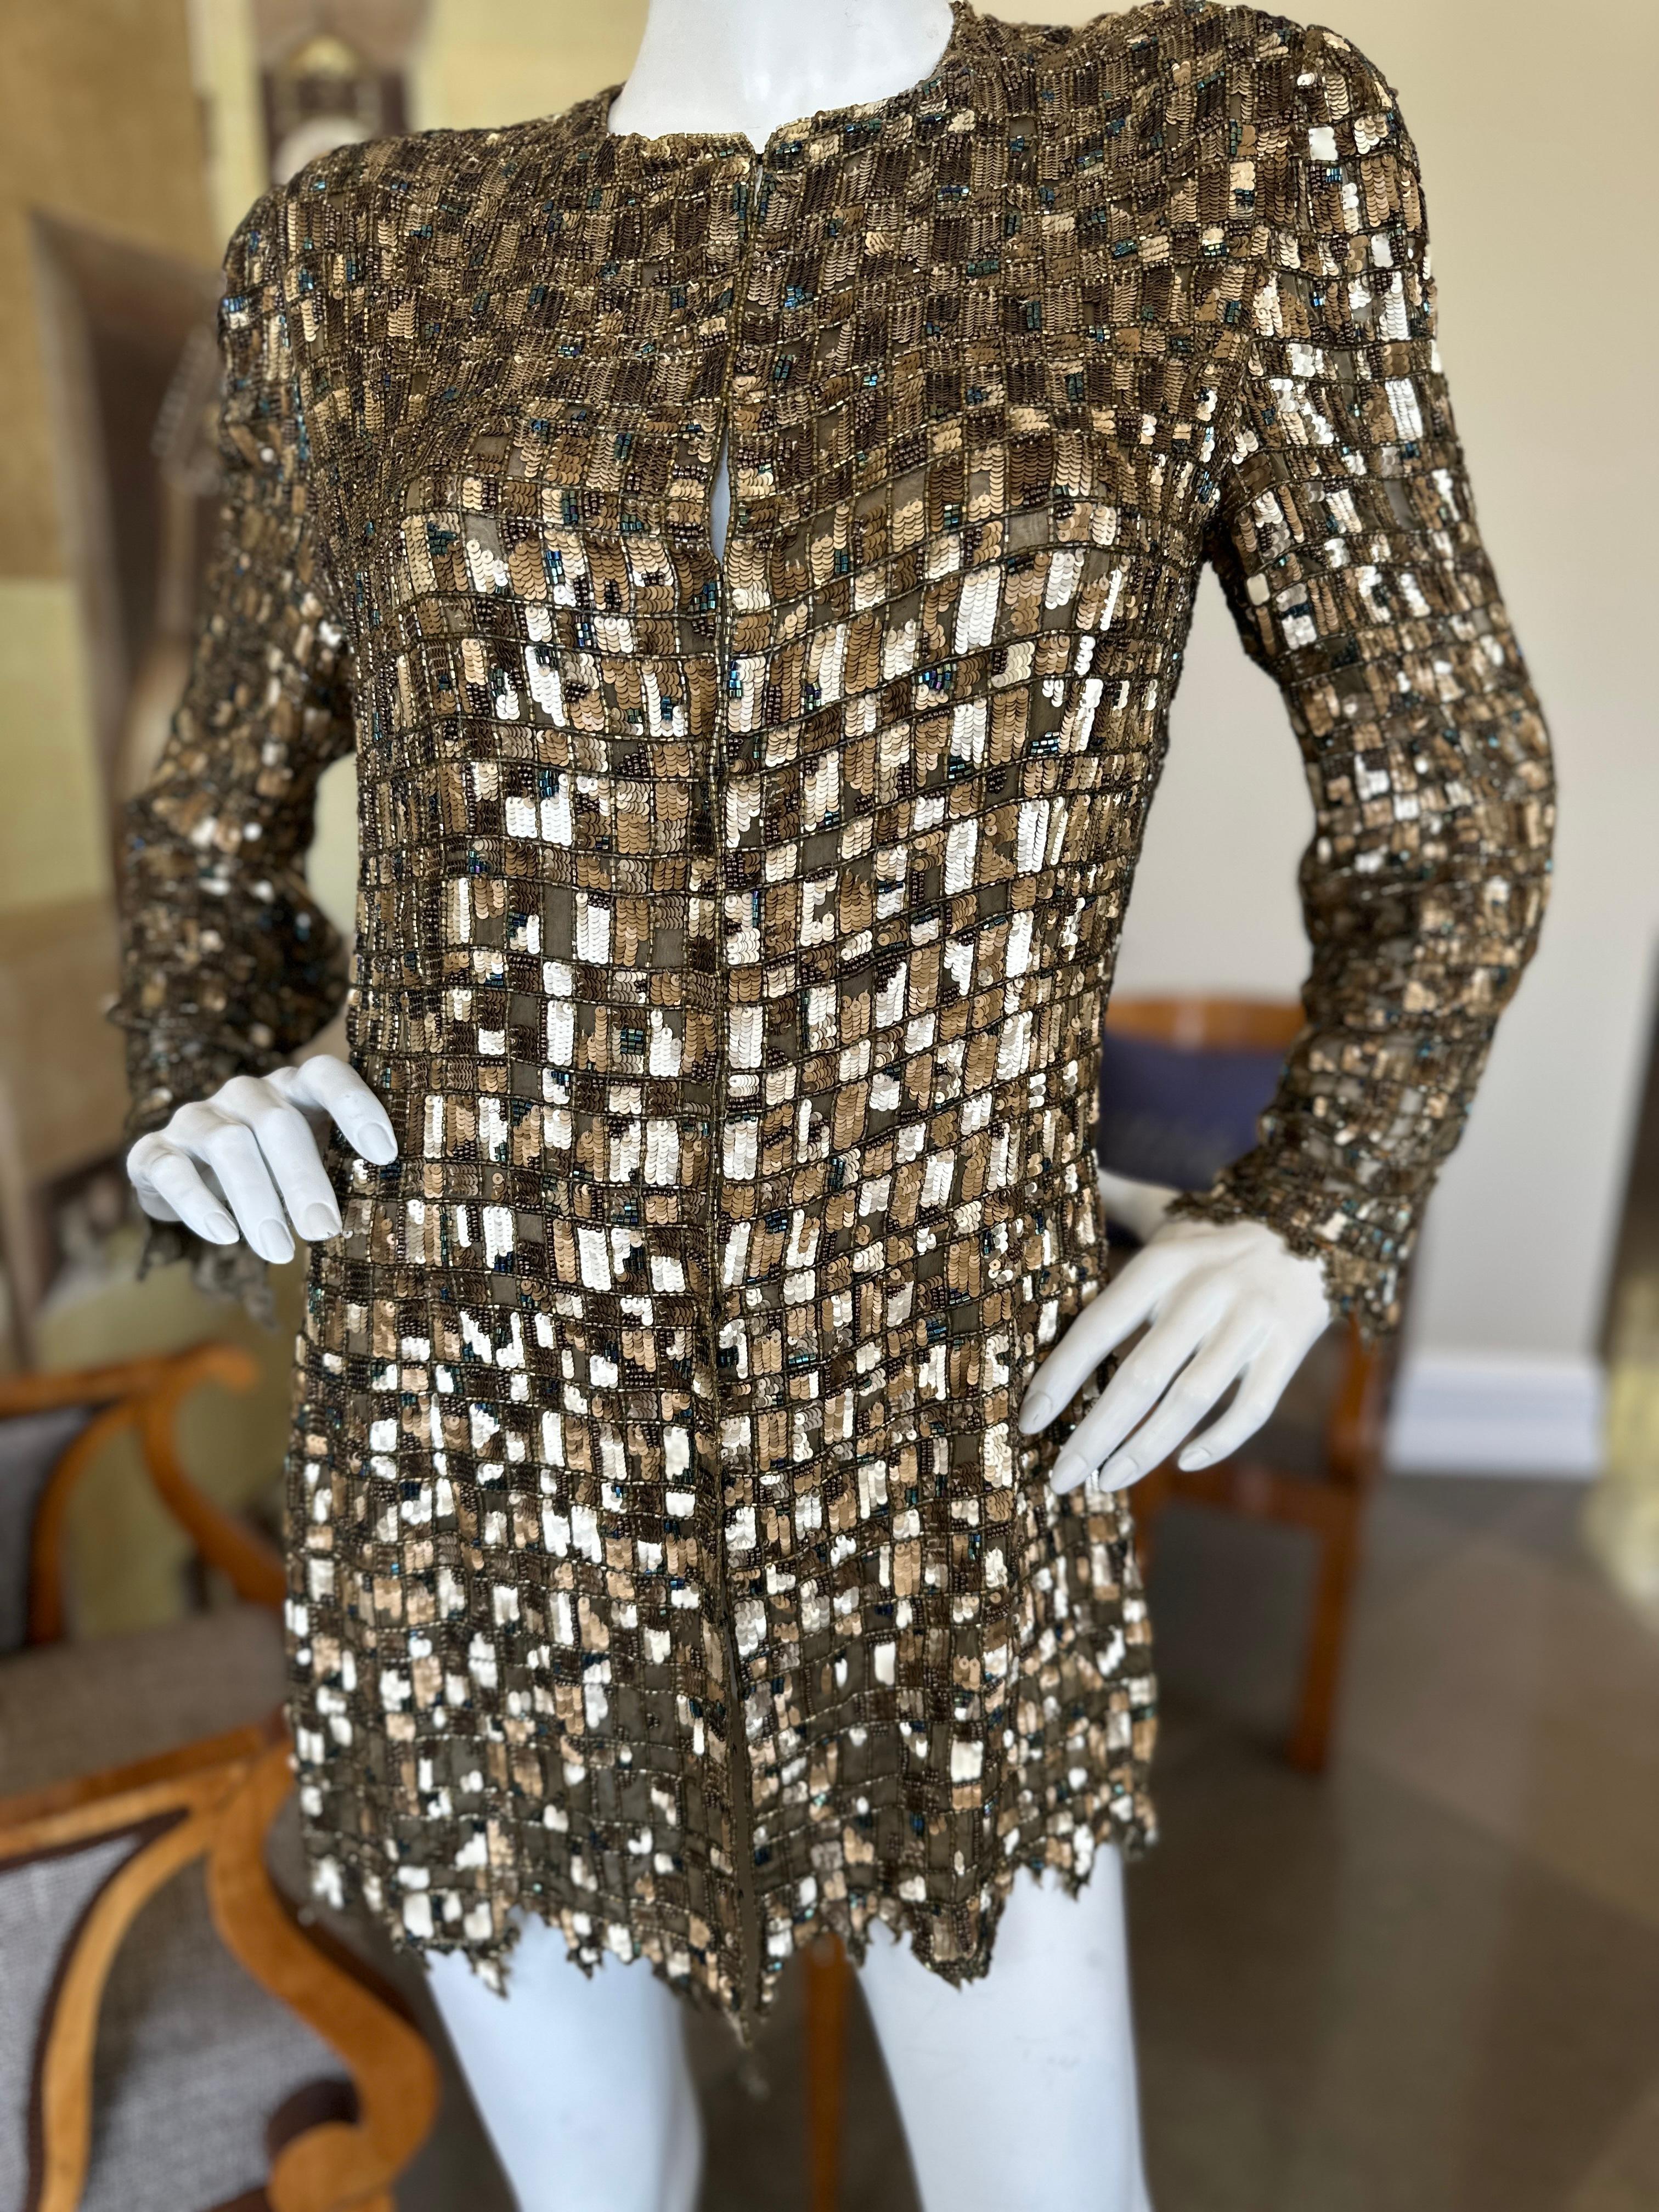 This very special Bill Blass evening jacket is covered in a mosiac pattern with gold and copper sequins, and blue aurora borealis and copper bugle beads. The unusual geometric pattern and matte sequins lend the piece an innate sophistication that is